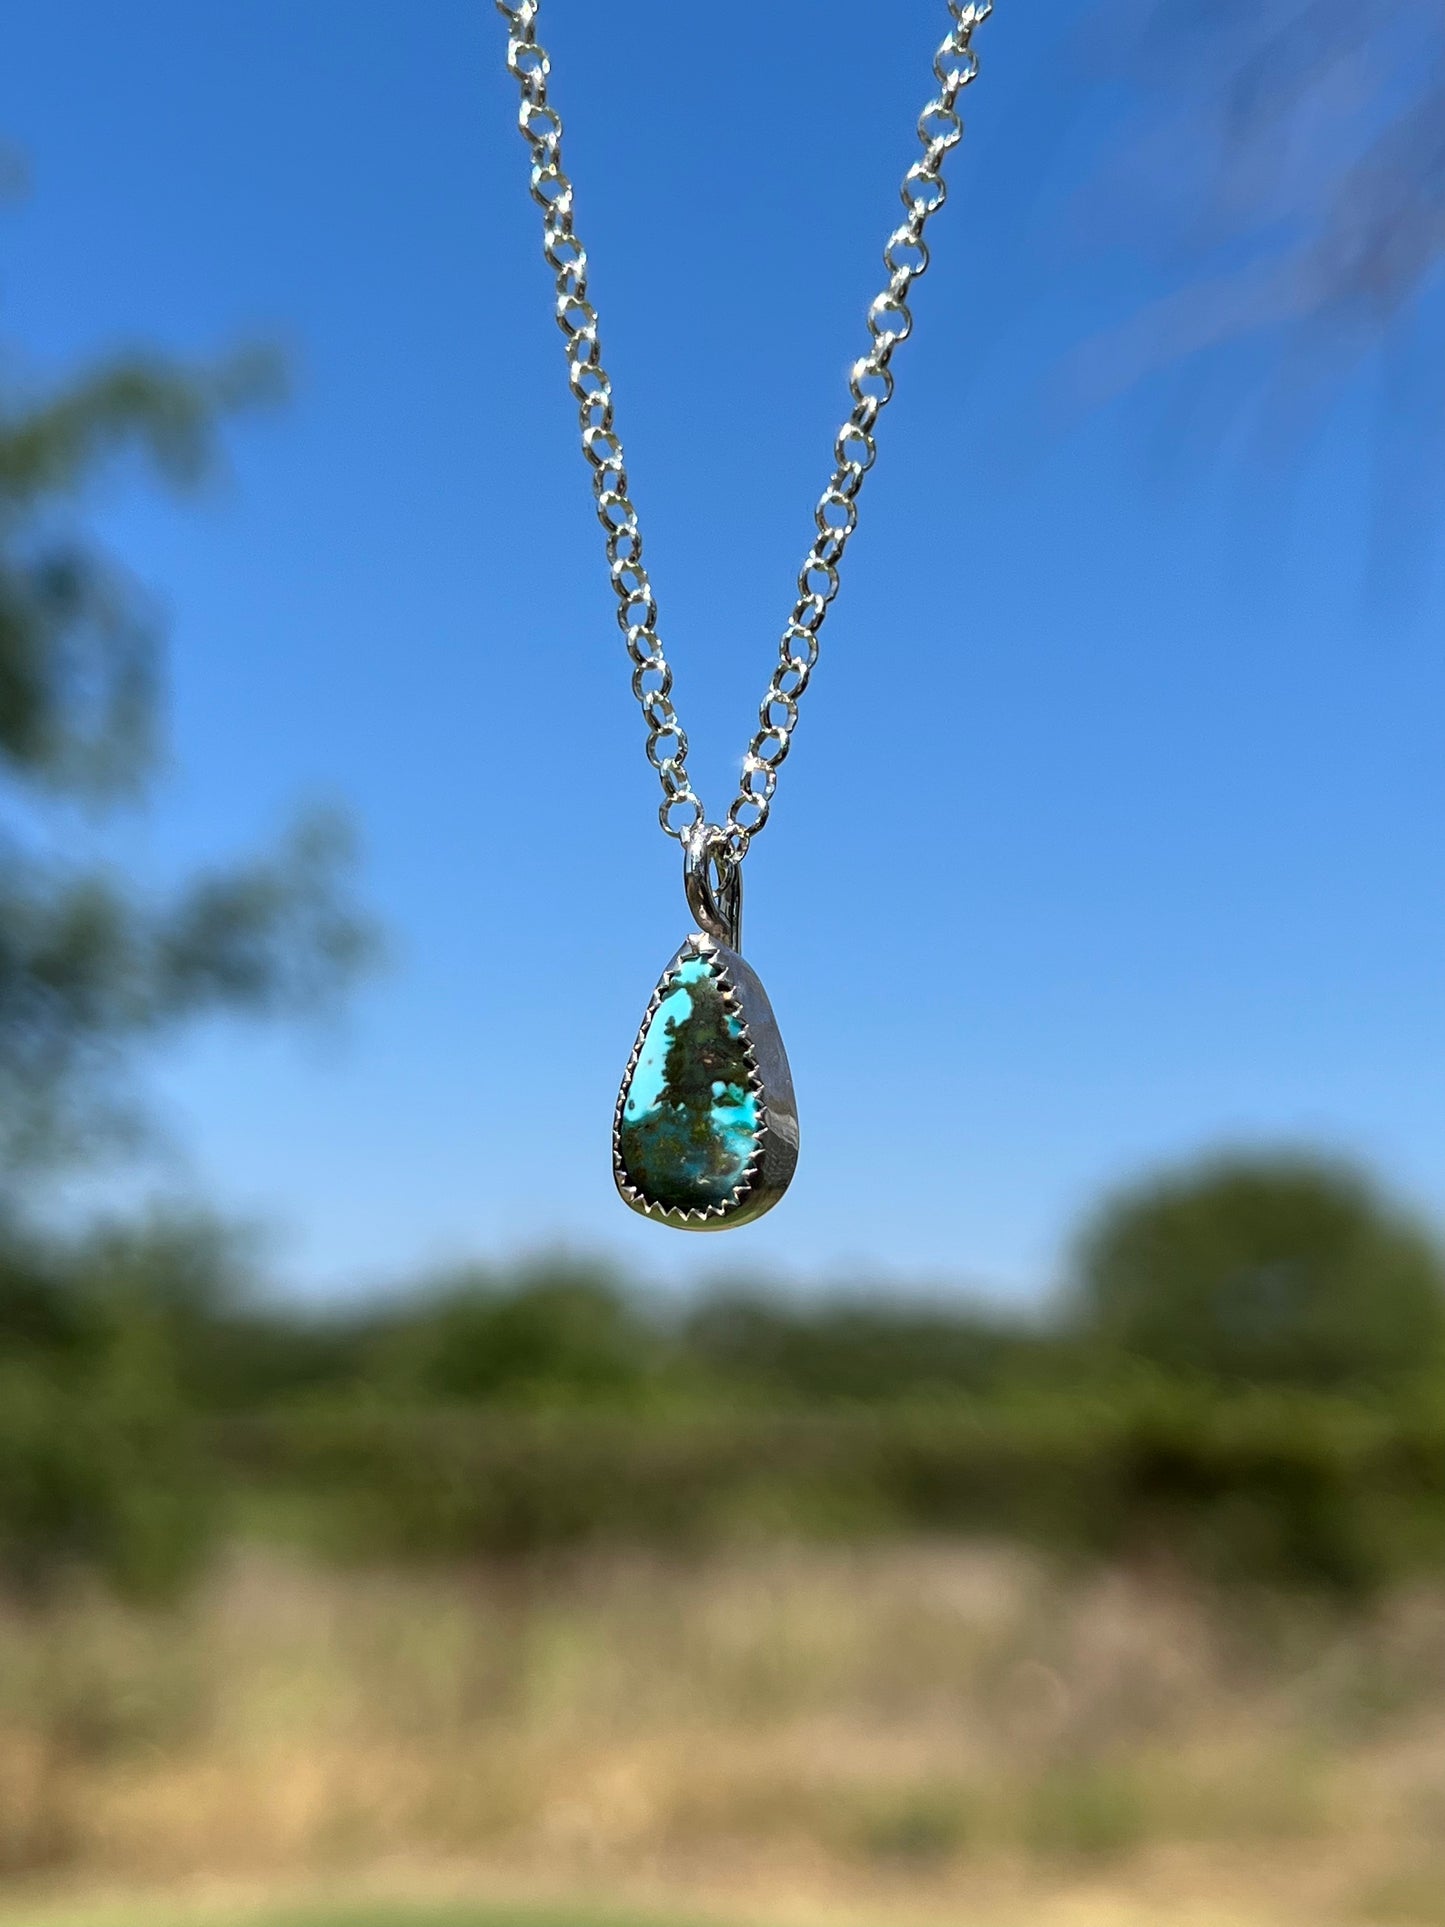 Tiny turquoise teardrop necklace